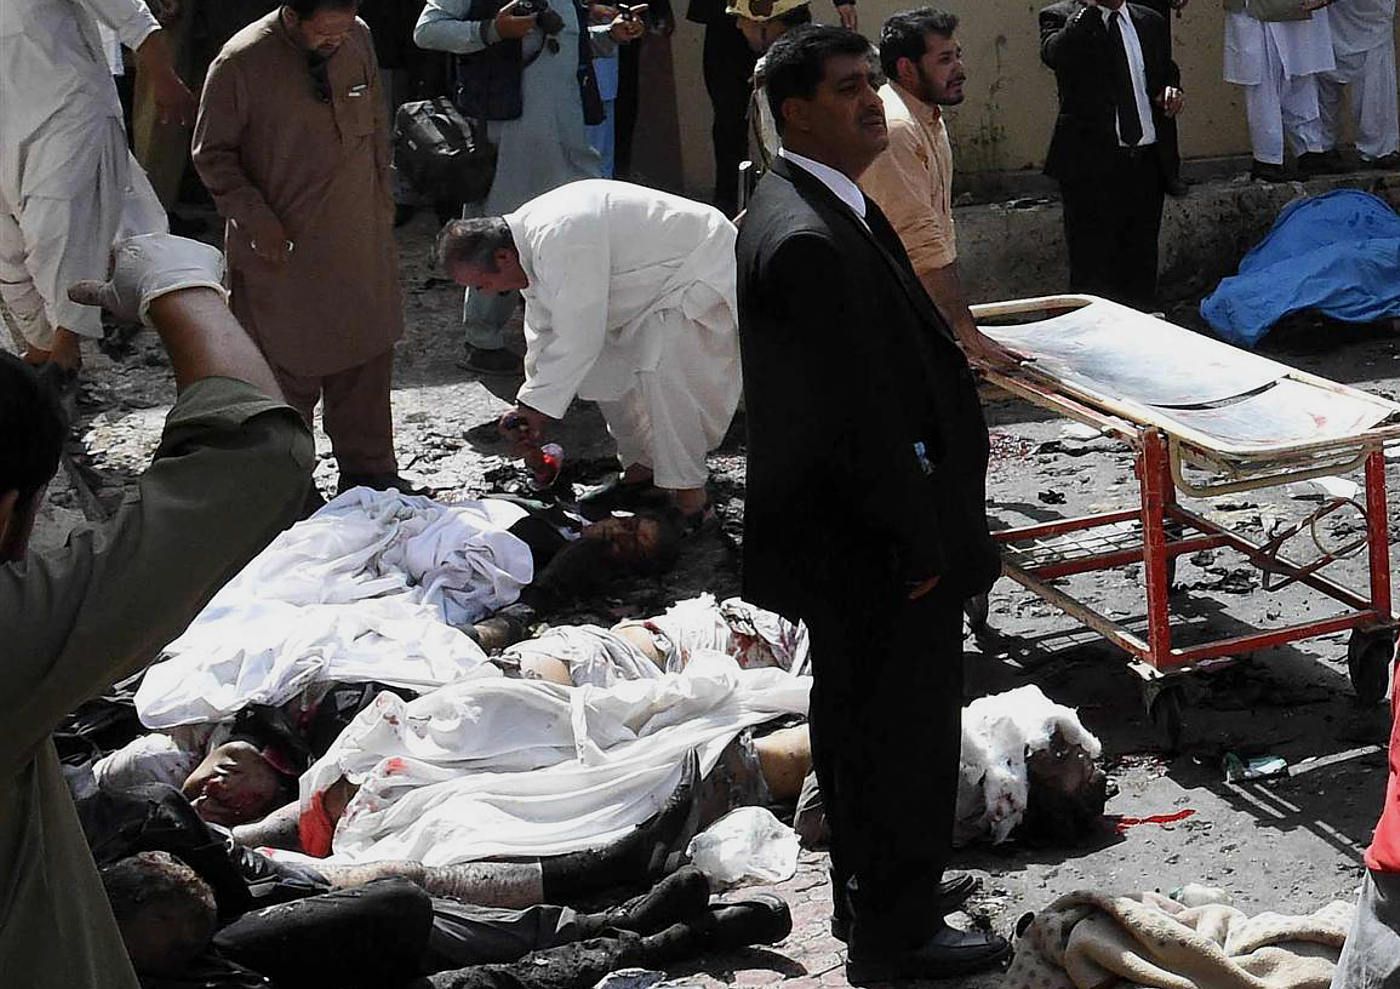 lawyer-killed-mourners-at-hospital-hit-by-suicide-bomber-6-Quetta-PK-aug-8-16.jpg